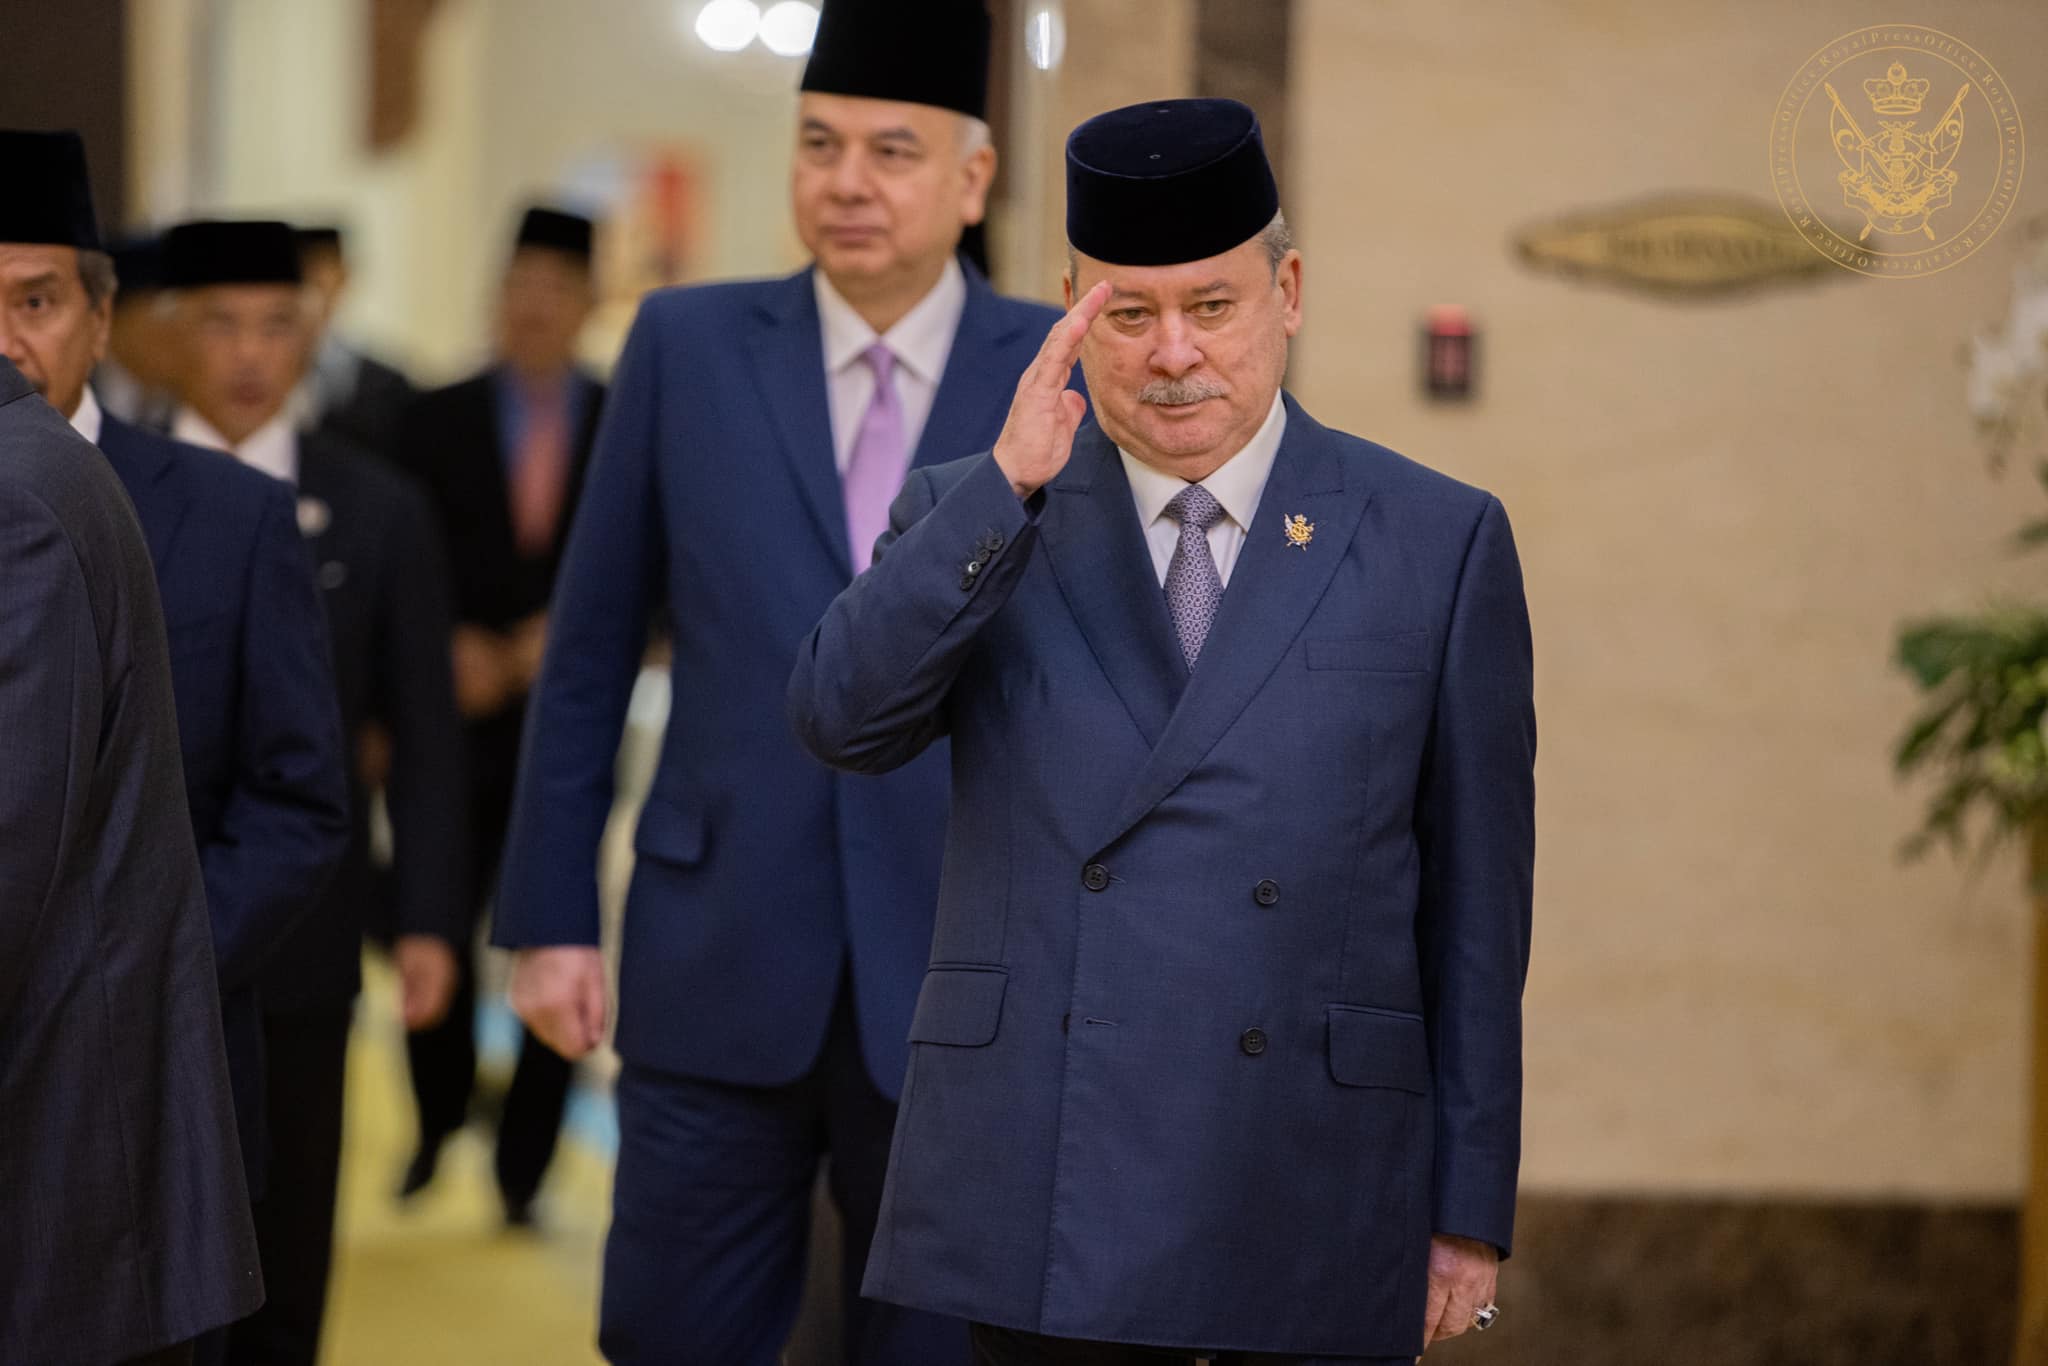 Sultan johor is the new agong